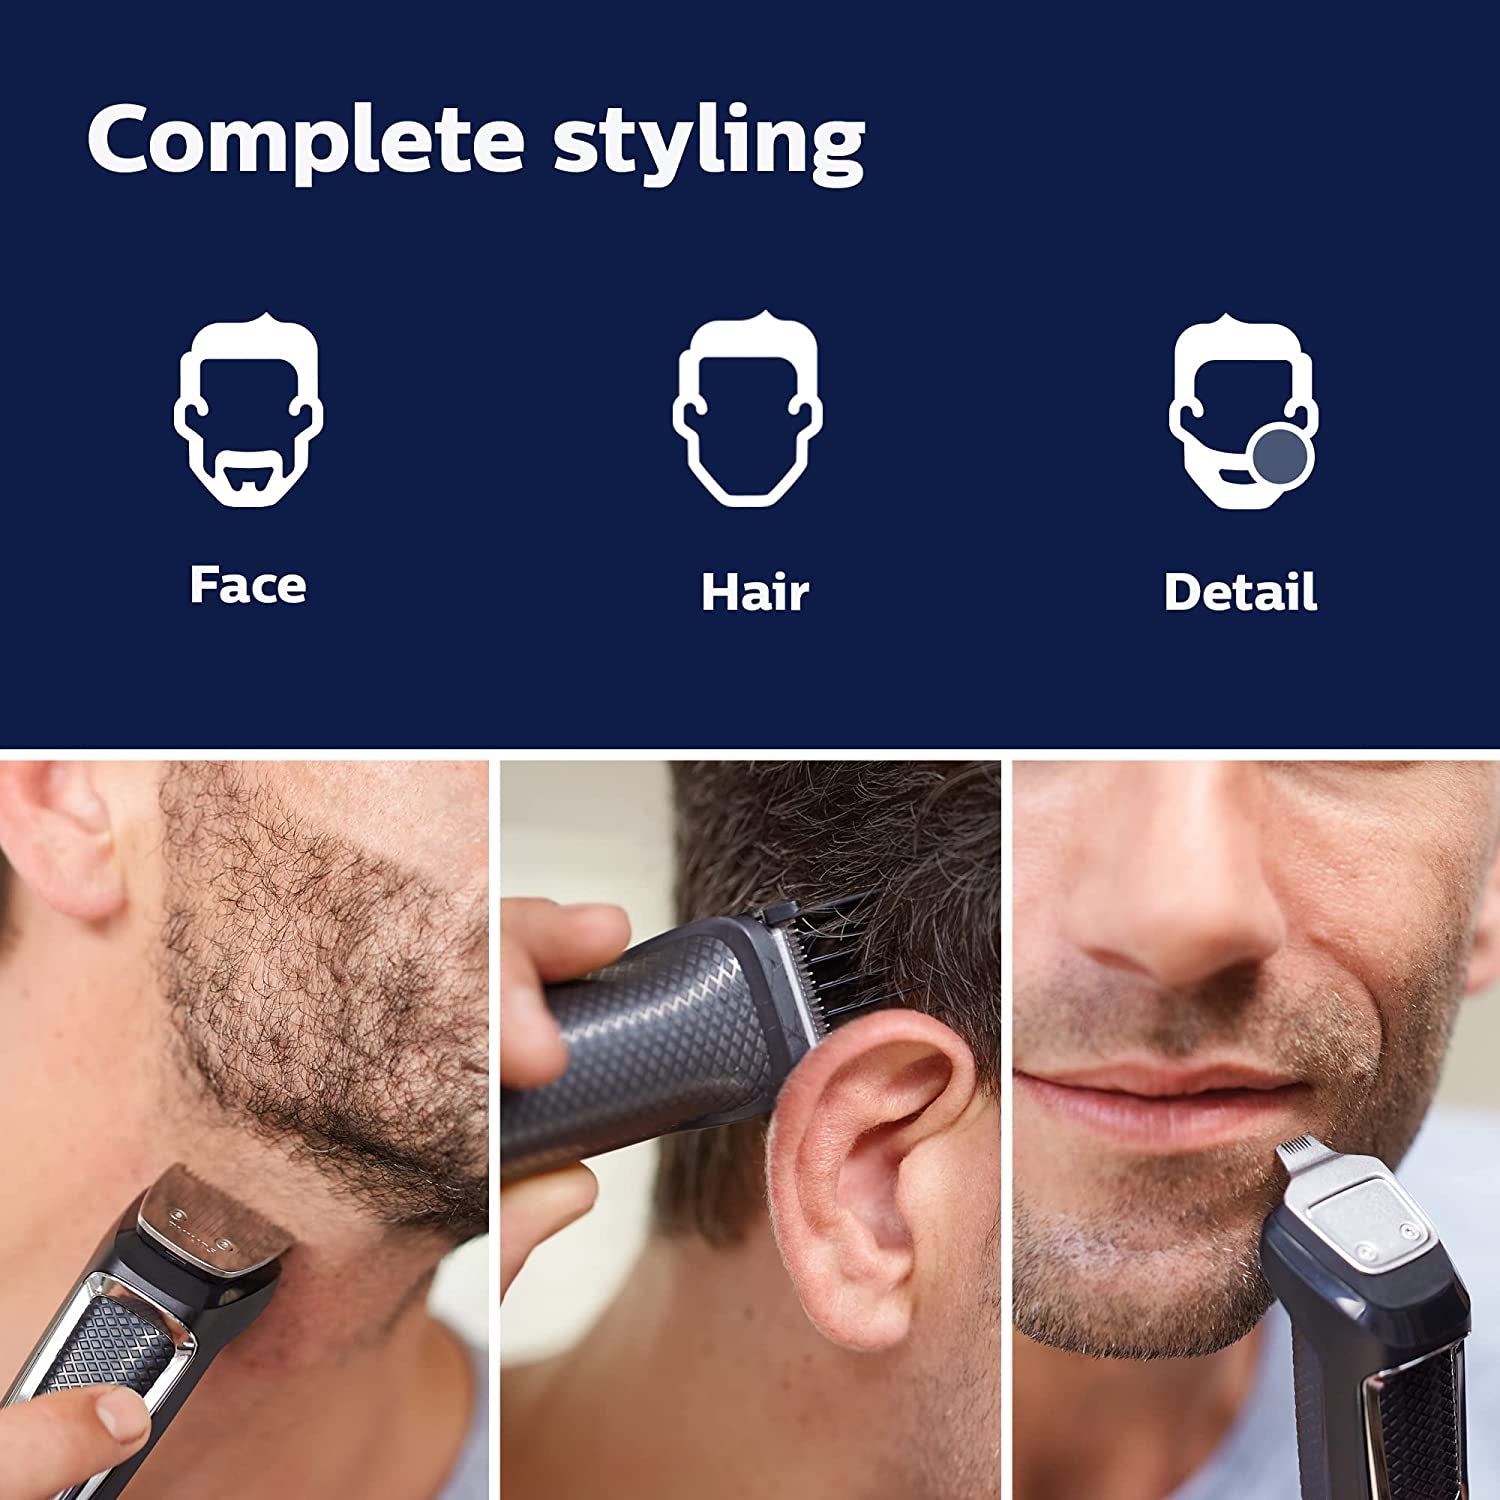 Philips  Multigroomer All-In-One Trimmer Series 3000, 13 Piece Mens Grooming Kit, for Beard, Face, Nose, and Ear Hair Trimmer and Hair Clipper, NO Blade Oil Needed, MG3750/60